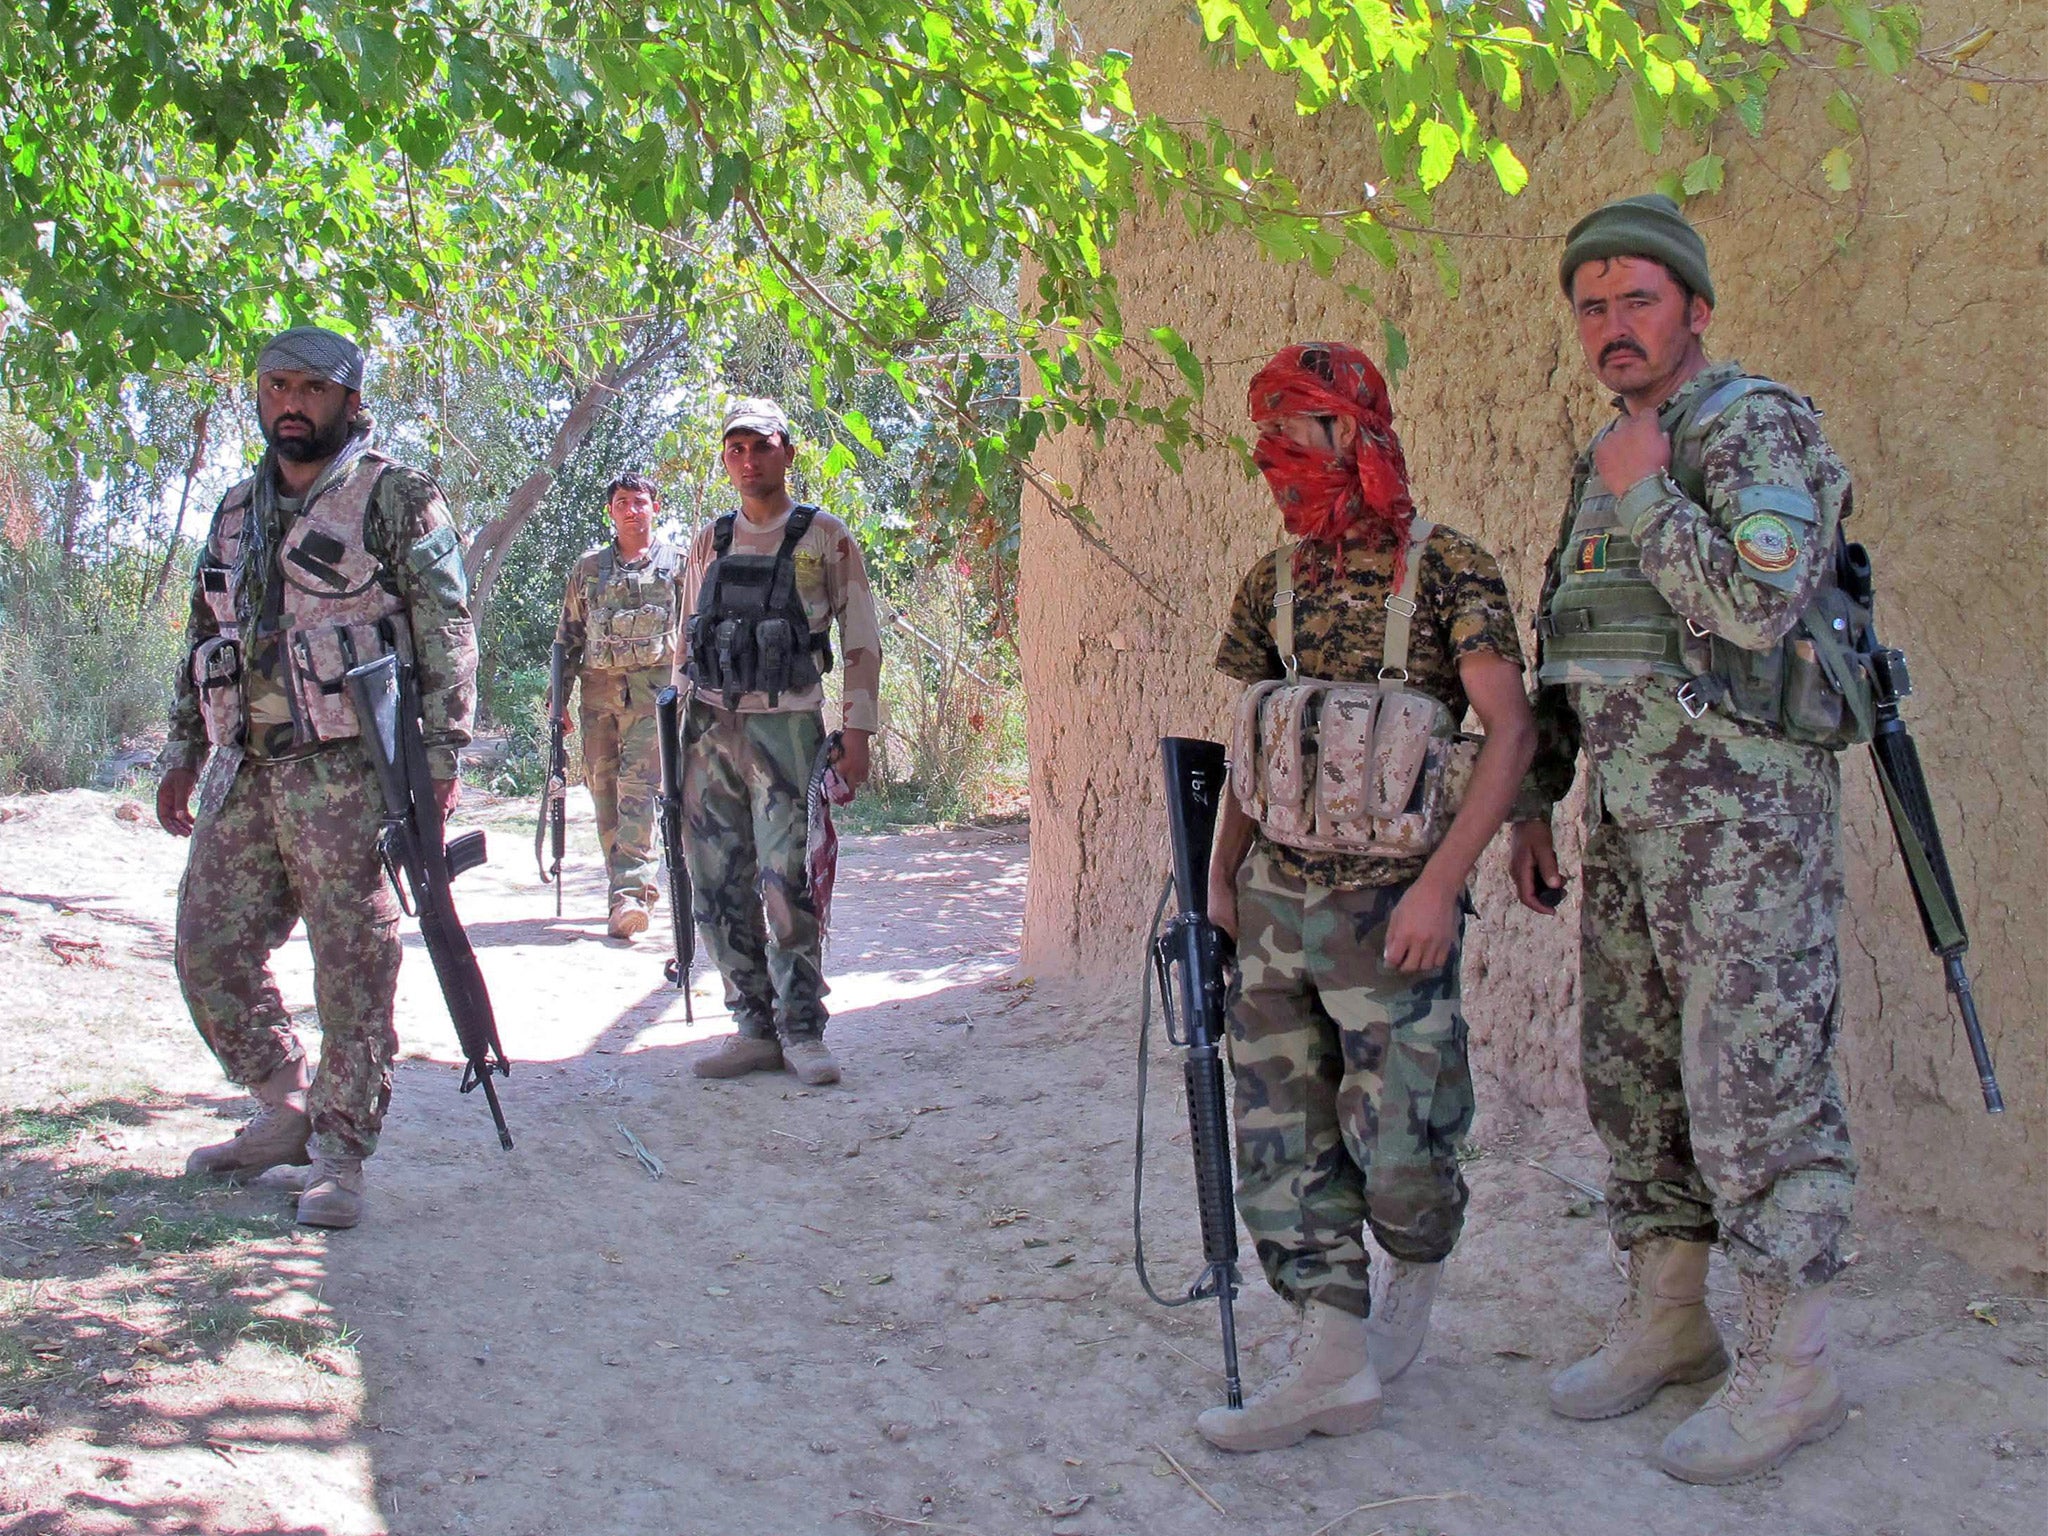 &#13;
Members of the Afghan security services on patrol following an operation against armed groups in Helmand province &#13;